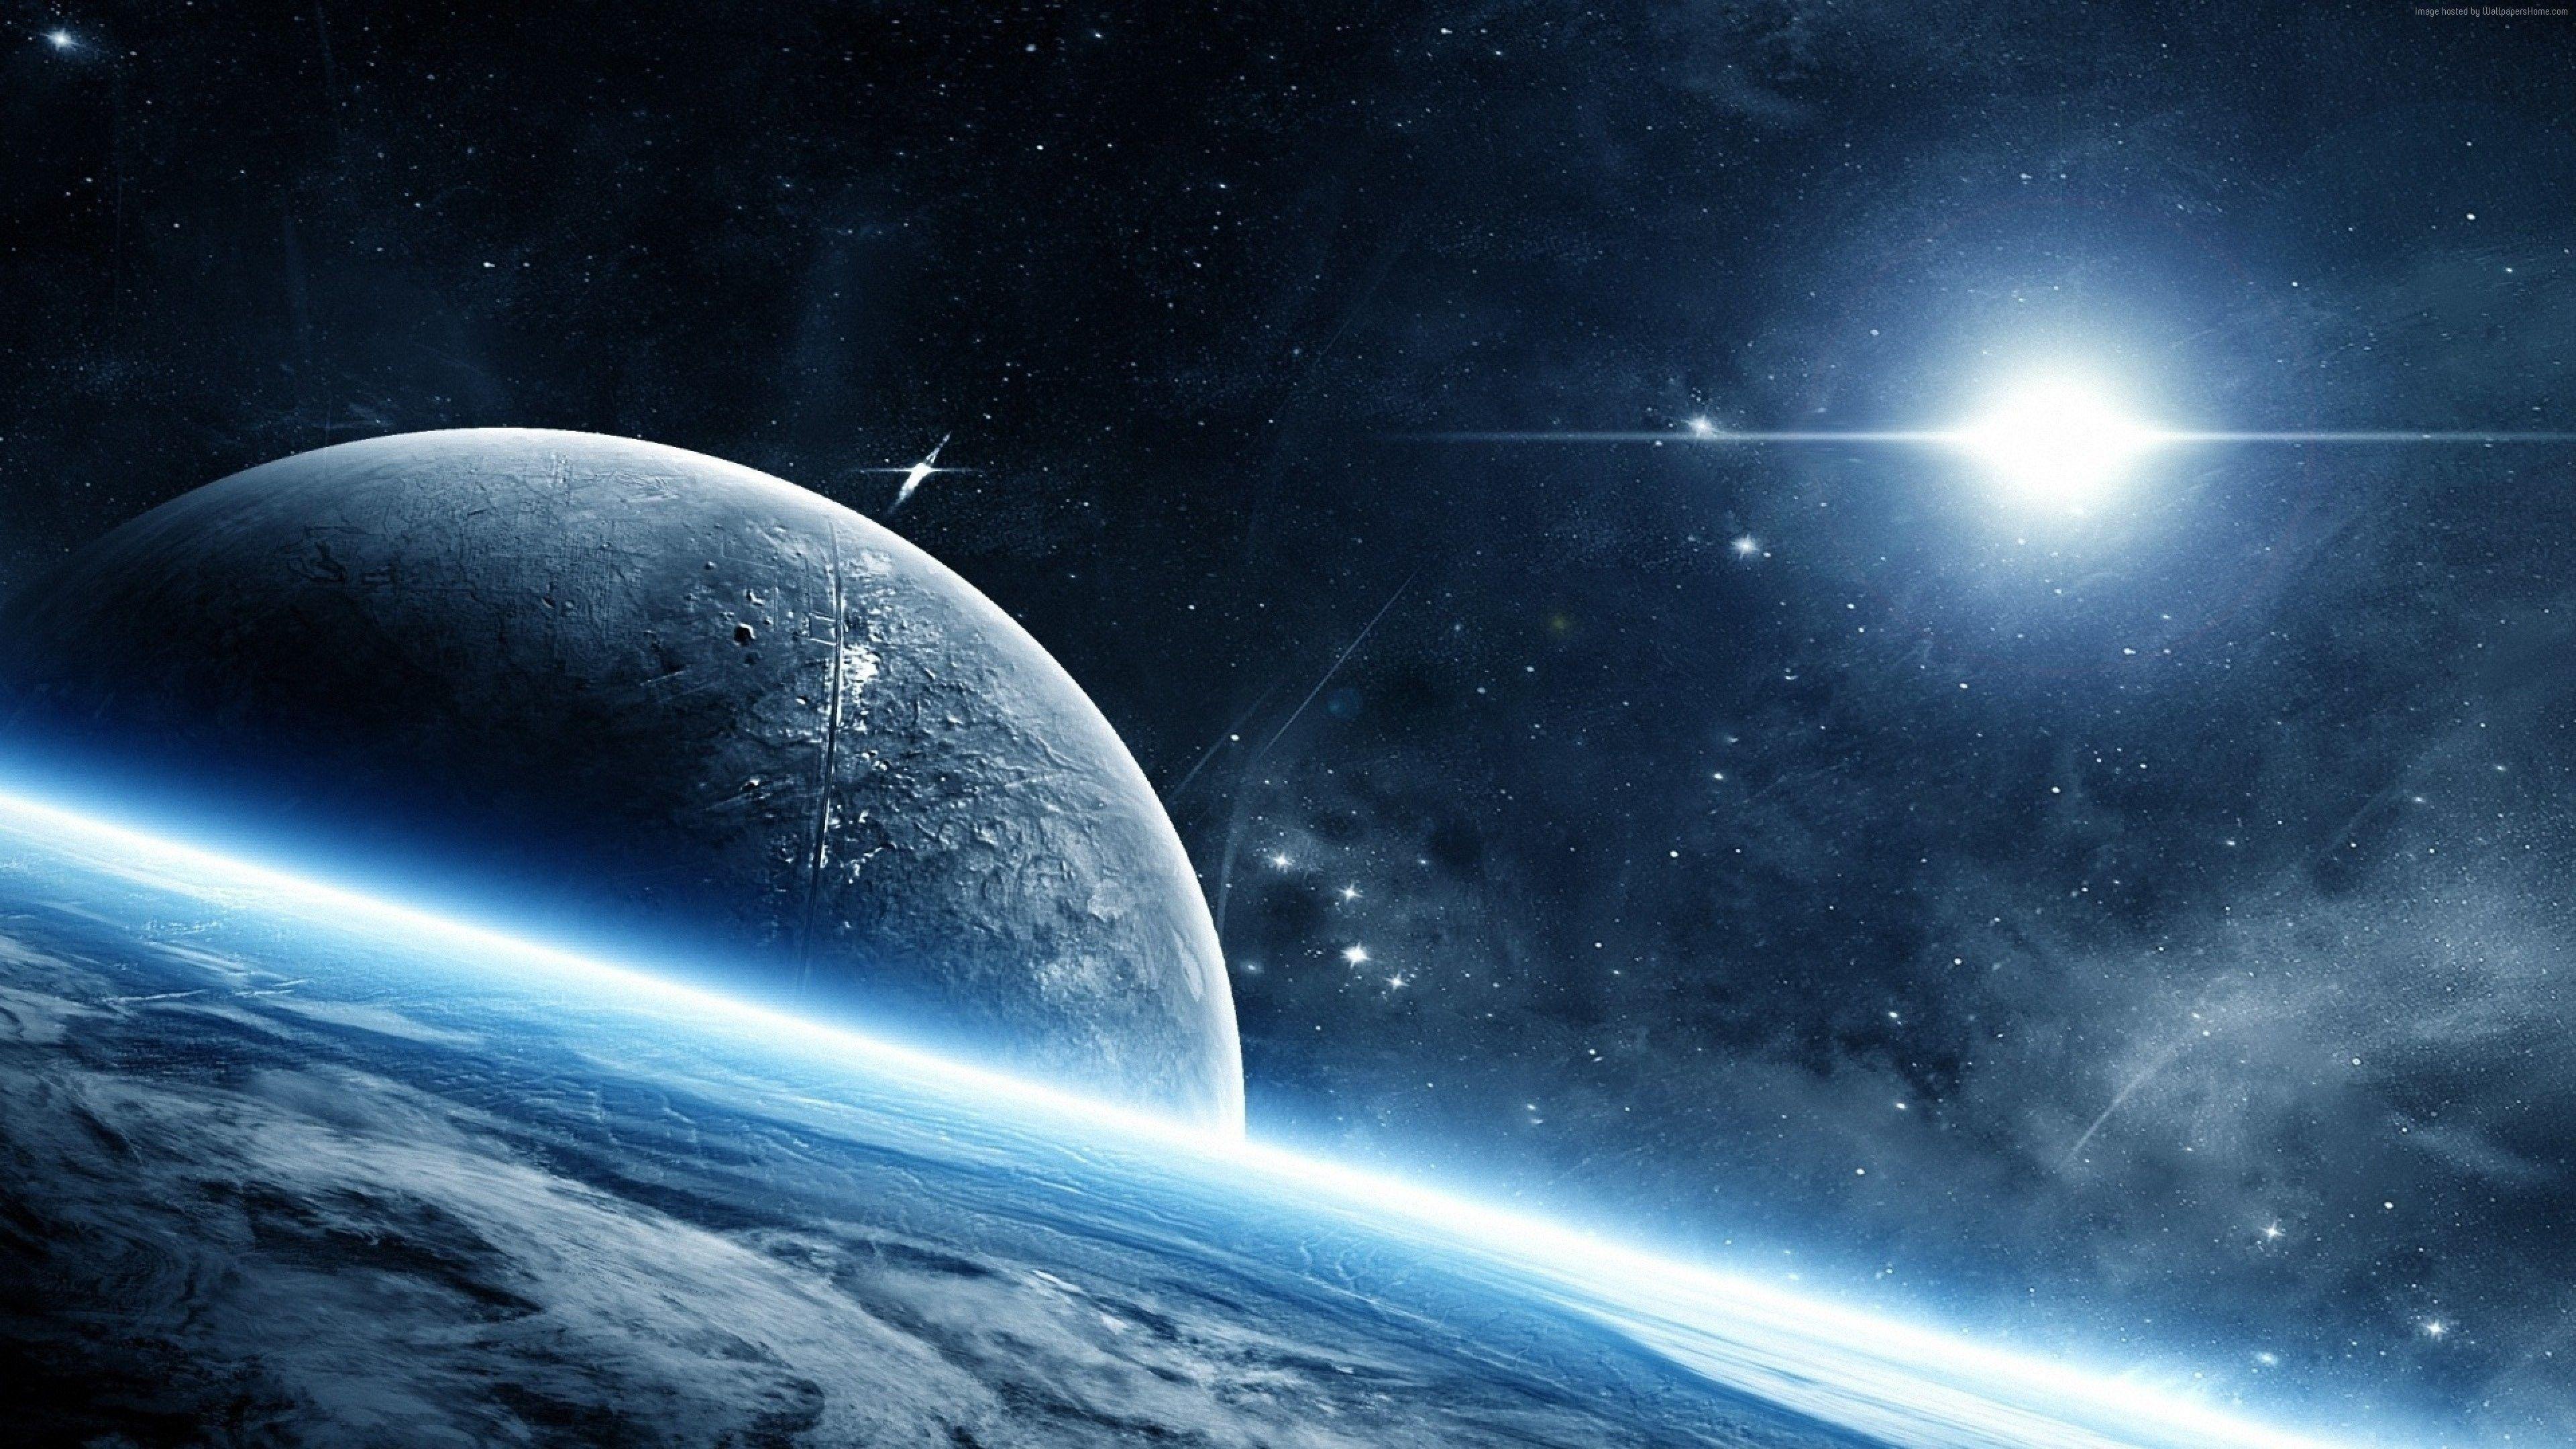 Space And Planets Wallpapers Top Free Space And Planets Backgrounds Wallpaperaccess 4194